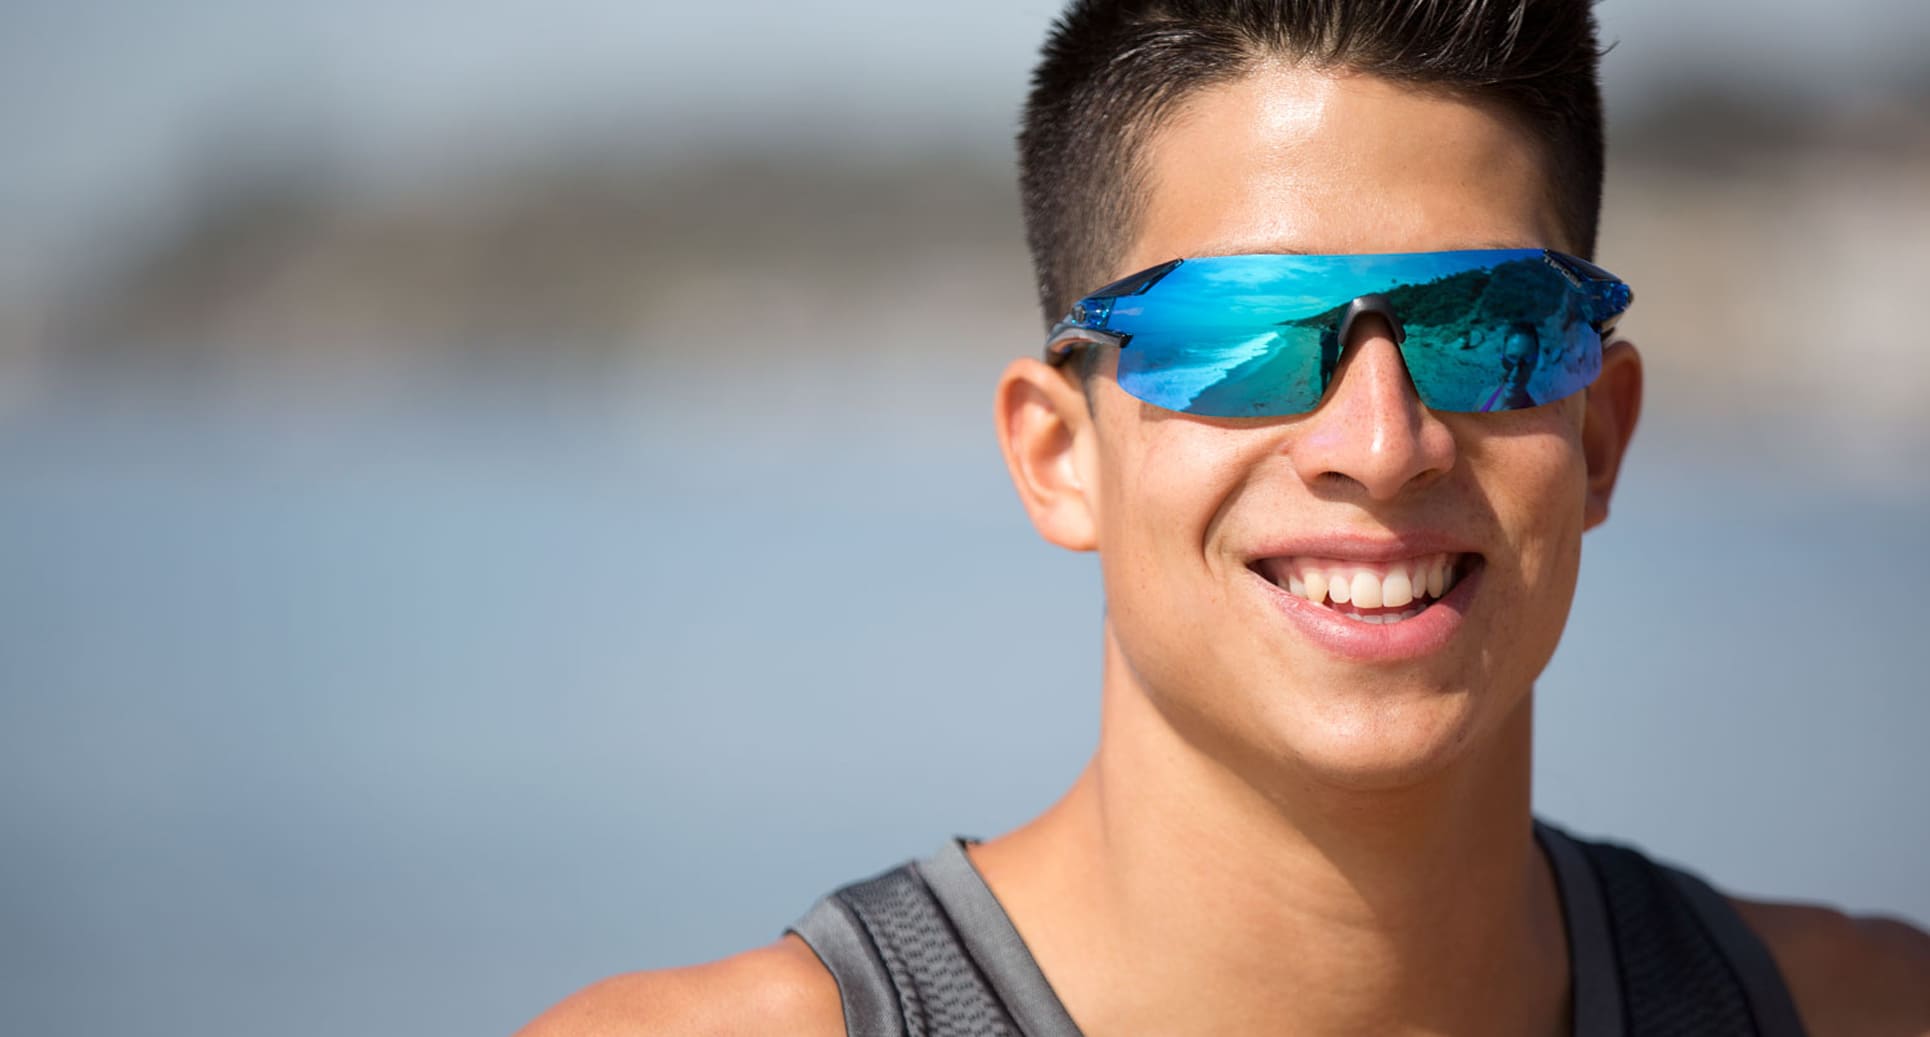 4 Health Benefits of Running Sunglasses That You Should Know